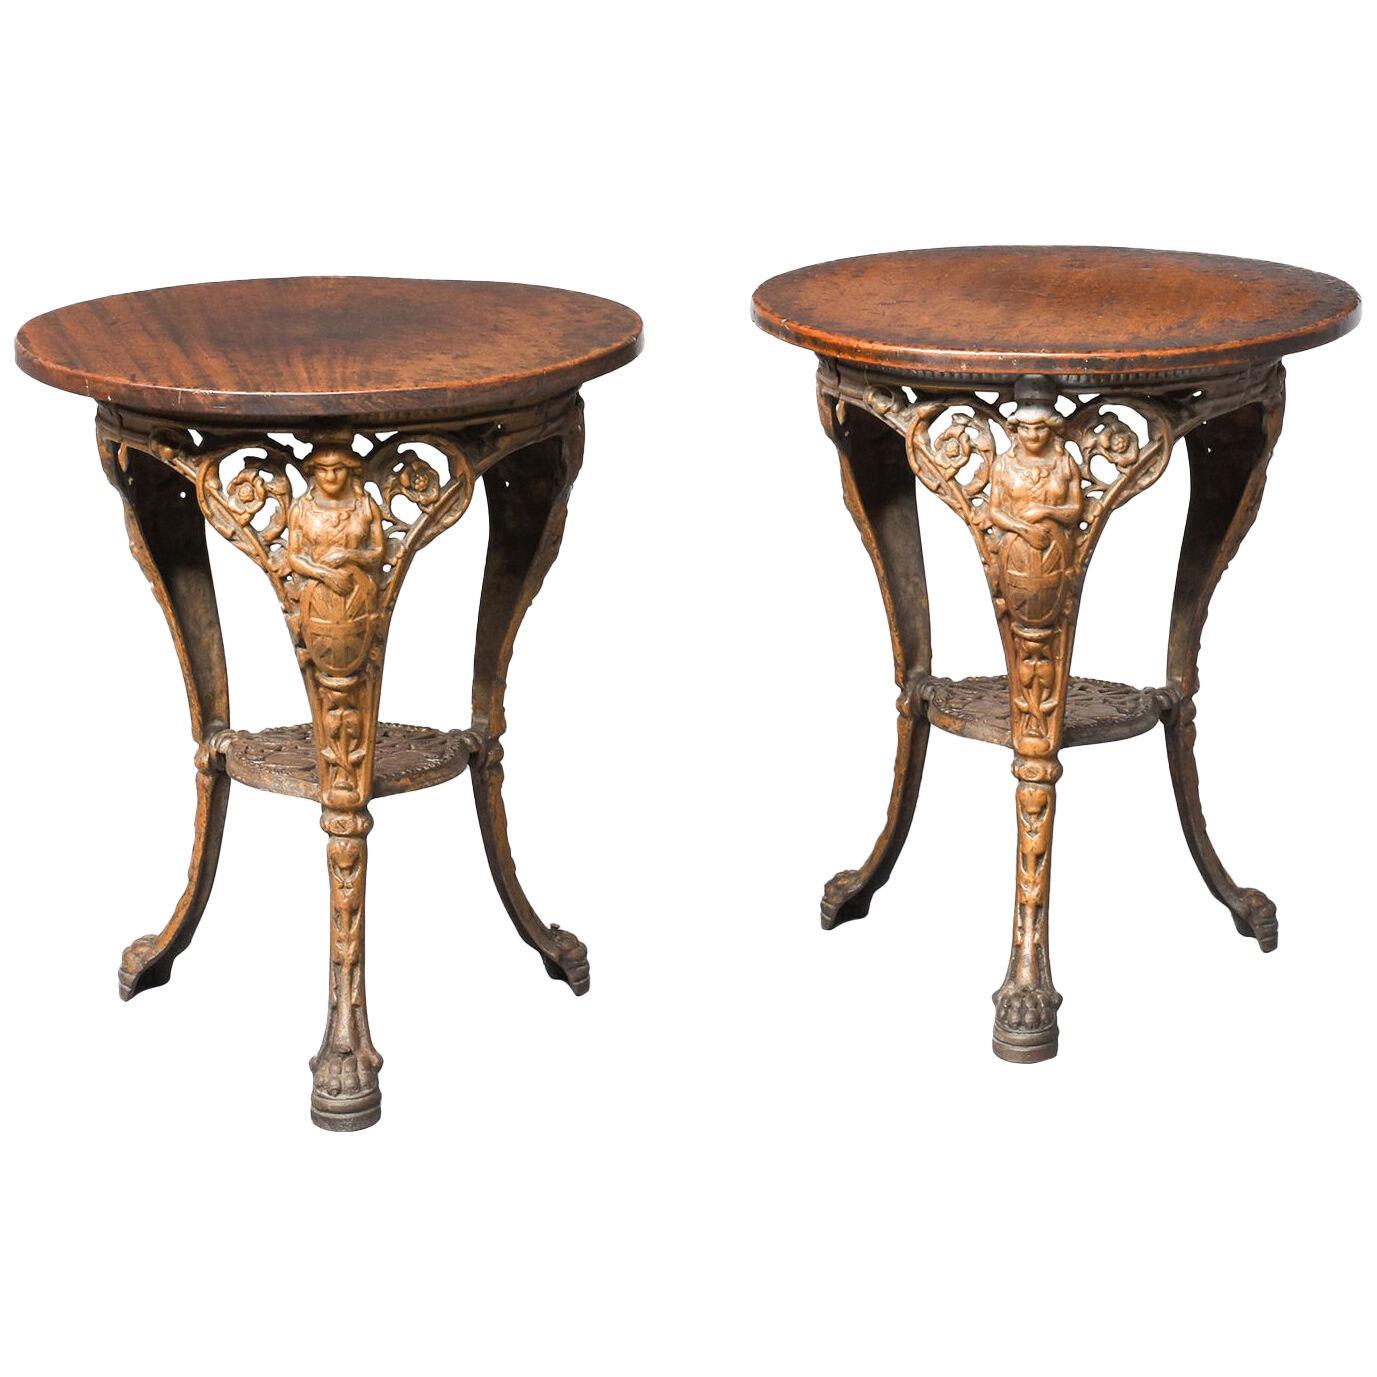 Pair Of Britannia Pattern Cast Iron Pub Tables with Circular Wooden Tops